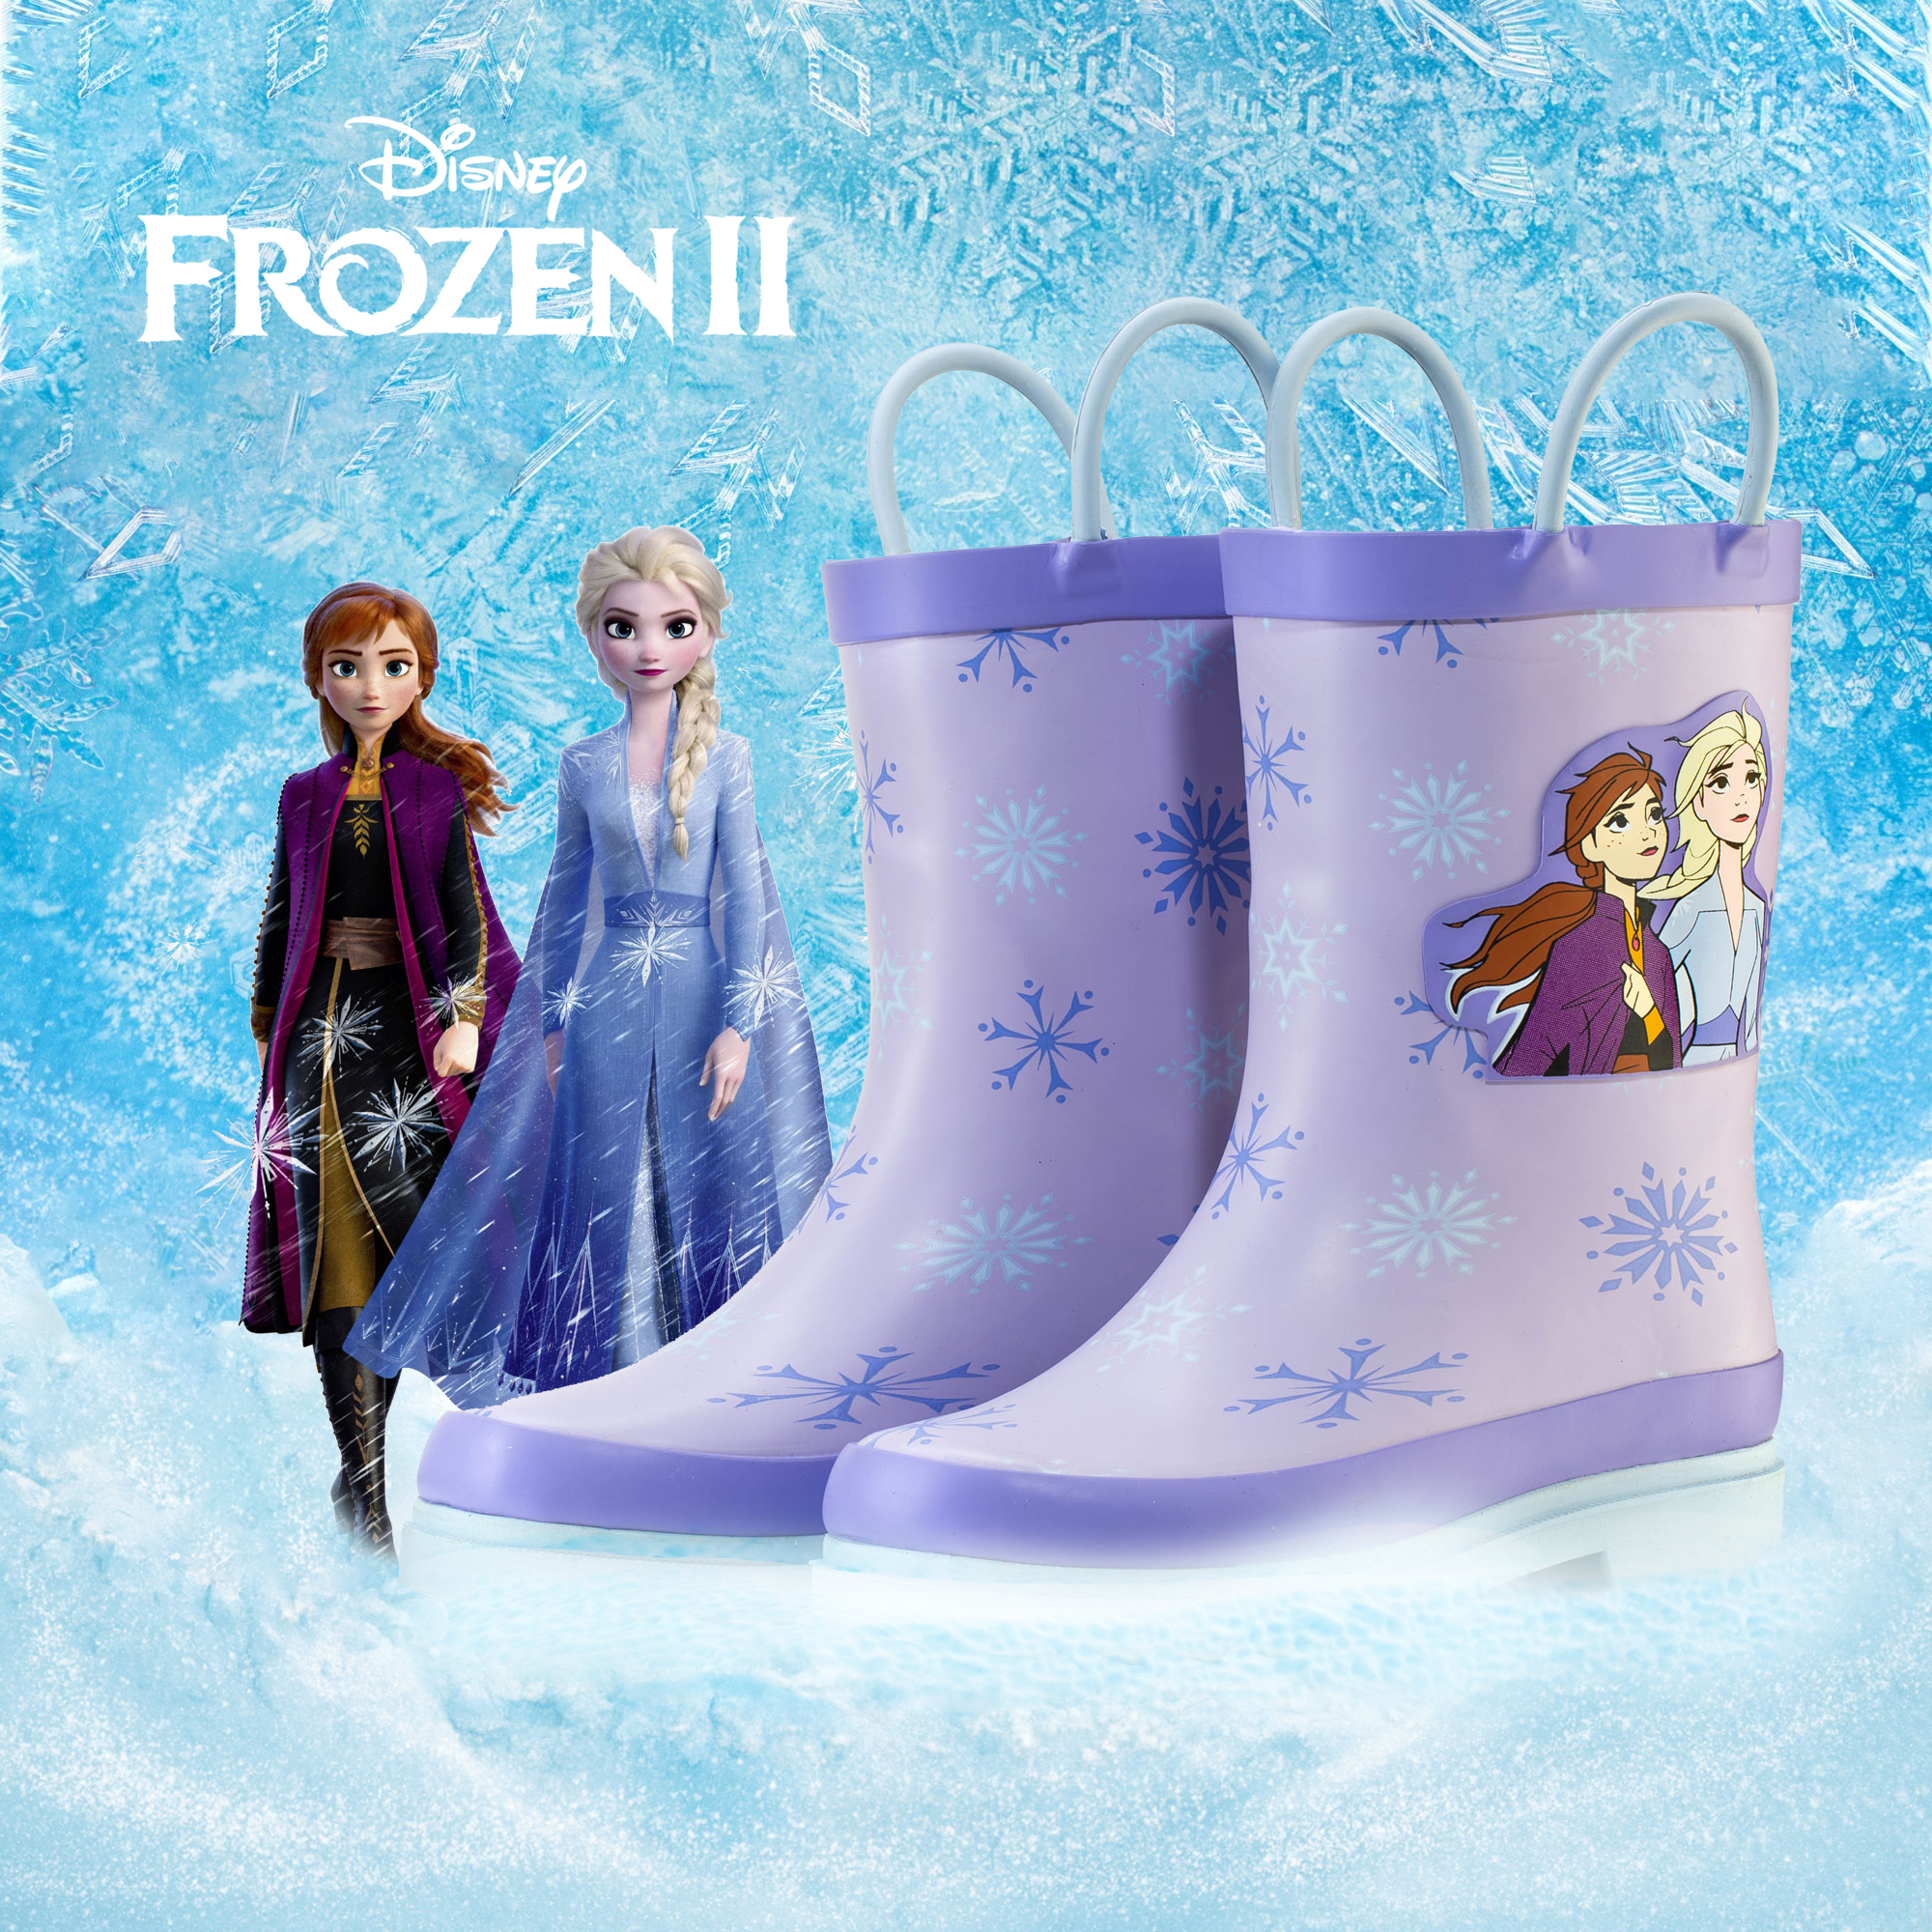 Disney Frozen 2 Girls Anna and Elsa Purple Rubber Easy-On Rain Boots&nbsp;- Size 8 Toddler - image 3 of 7